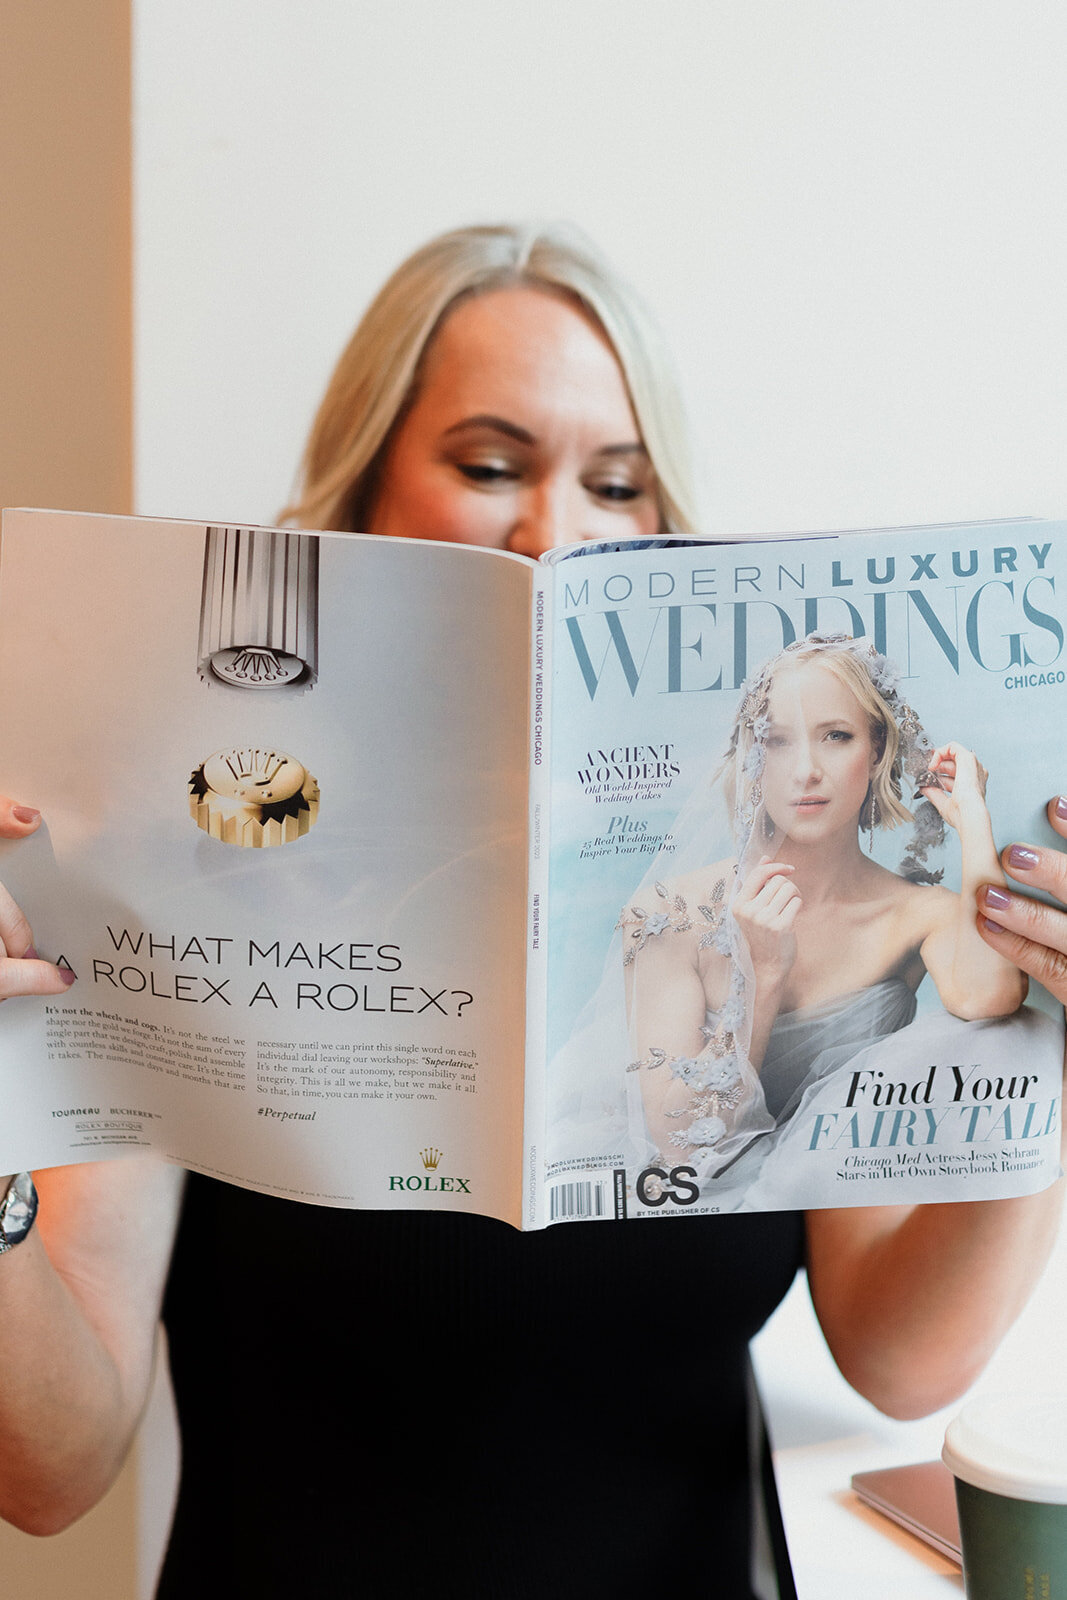 blonde woman is reading a wedding magazine and holding up to cover most of her face. You can only see her eyes reading the magazine.